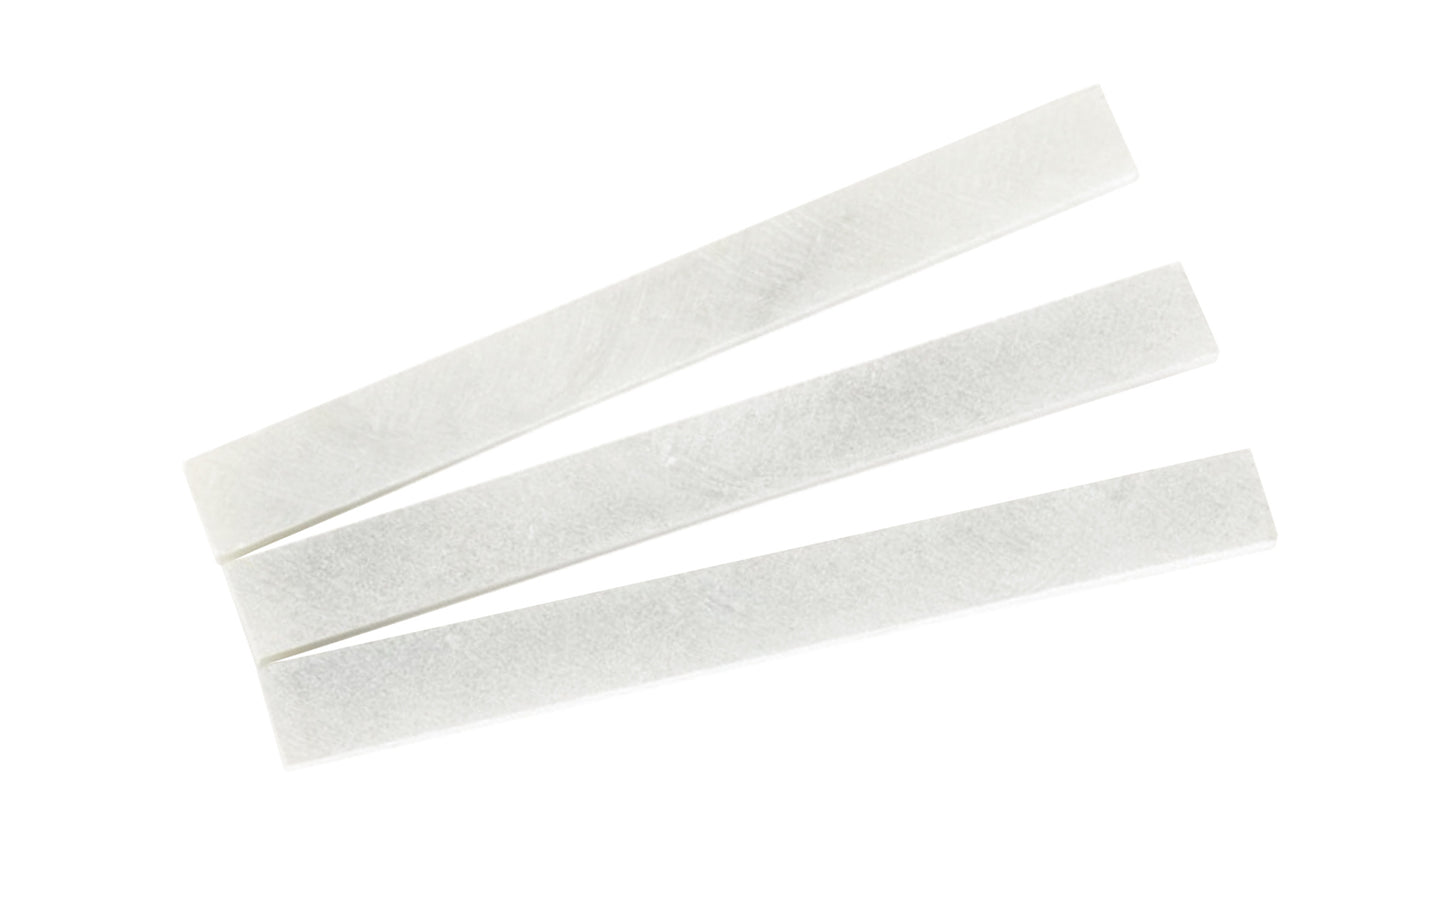 3/16" x 1/2" x 5" size soapstone refill pieces. Made of natural soapstone & marks well on dark surfaces. Great for for marking & outlining welds. Won't contaminate welds. #1 select natural white soapstone pencil refill. 3 Pack. Made by Forney Industries. Model 60306. 032277603066. 3/16" Thick x 1/2" Wide x 5" Long